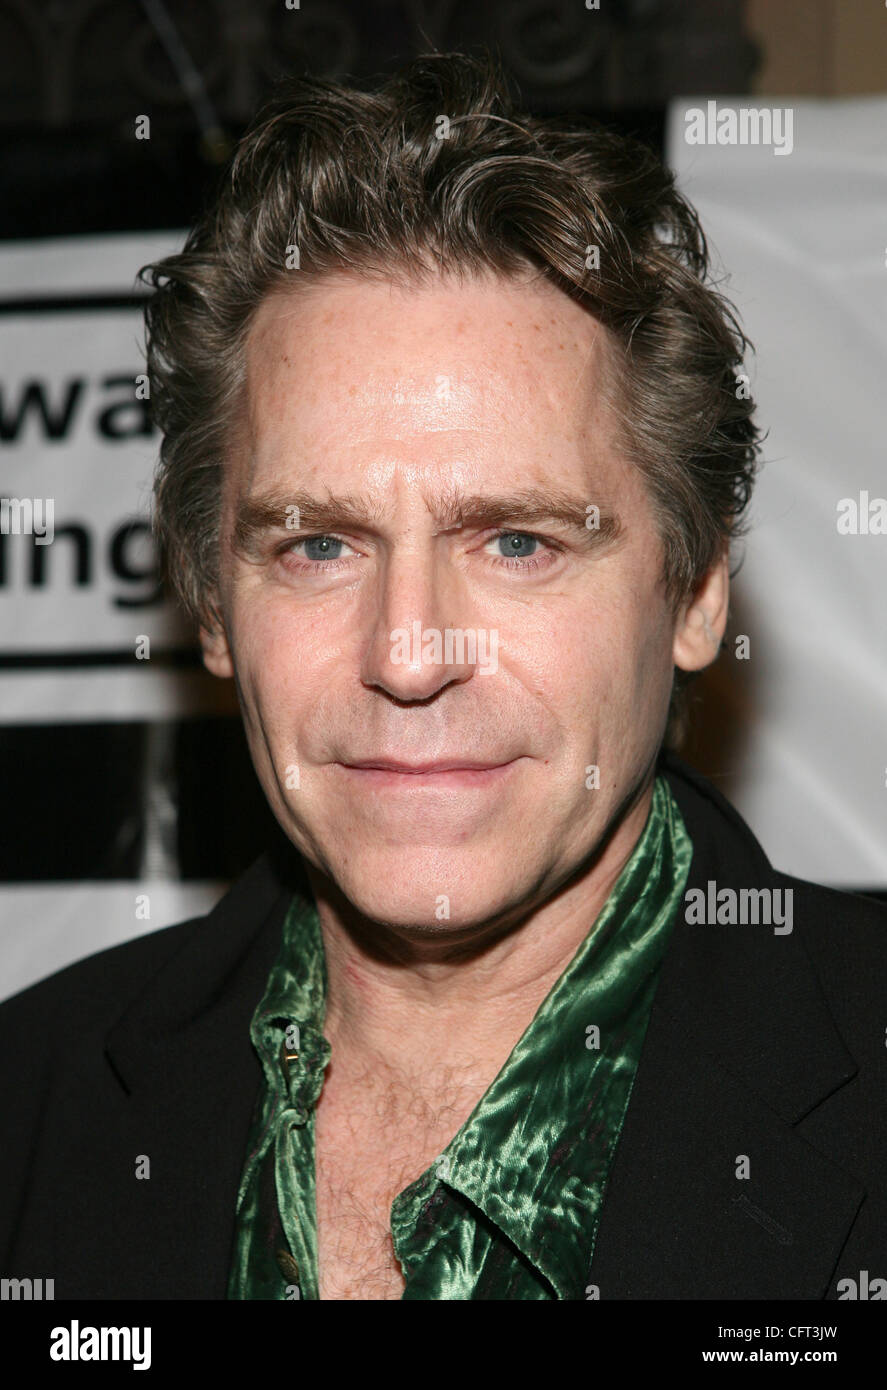 Dec 07, 2006; Hollywood, CA, USA; Actor JEFF CONAWAY arrives at the Howard Fine holiday party benefiting project Angel food. Mandatory Credit: Photo by Marianna Day Massey/ZUMA Press. (©) Copyright 2006 by Marianna Day Massey Stock Photo